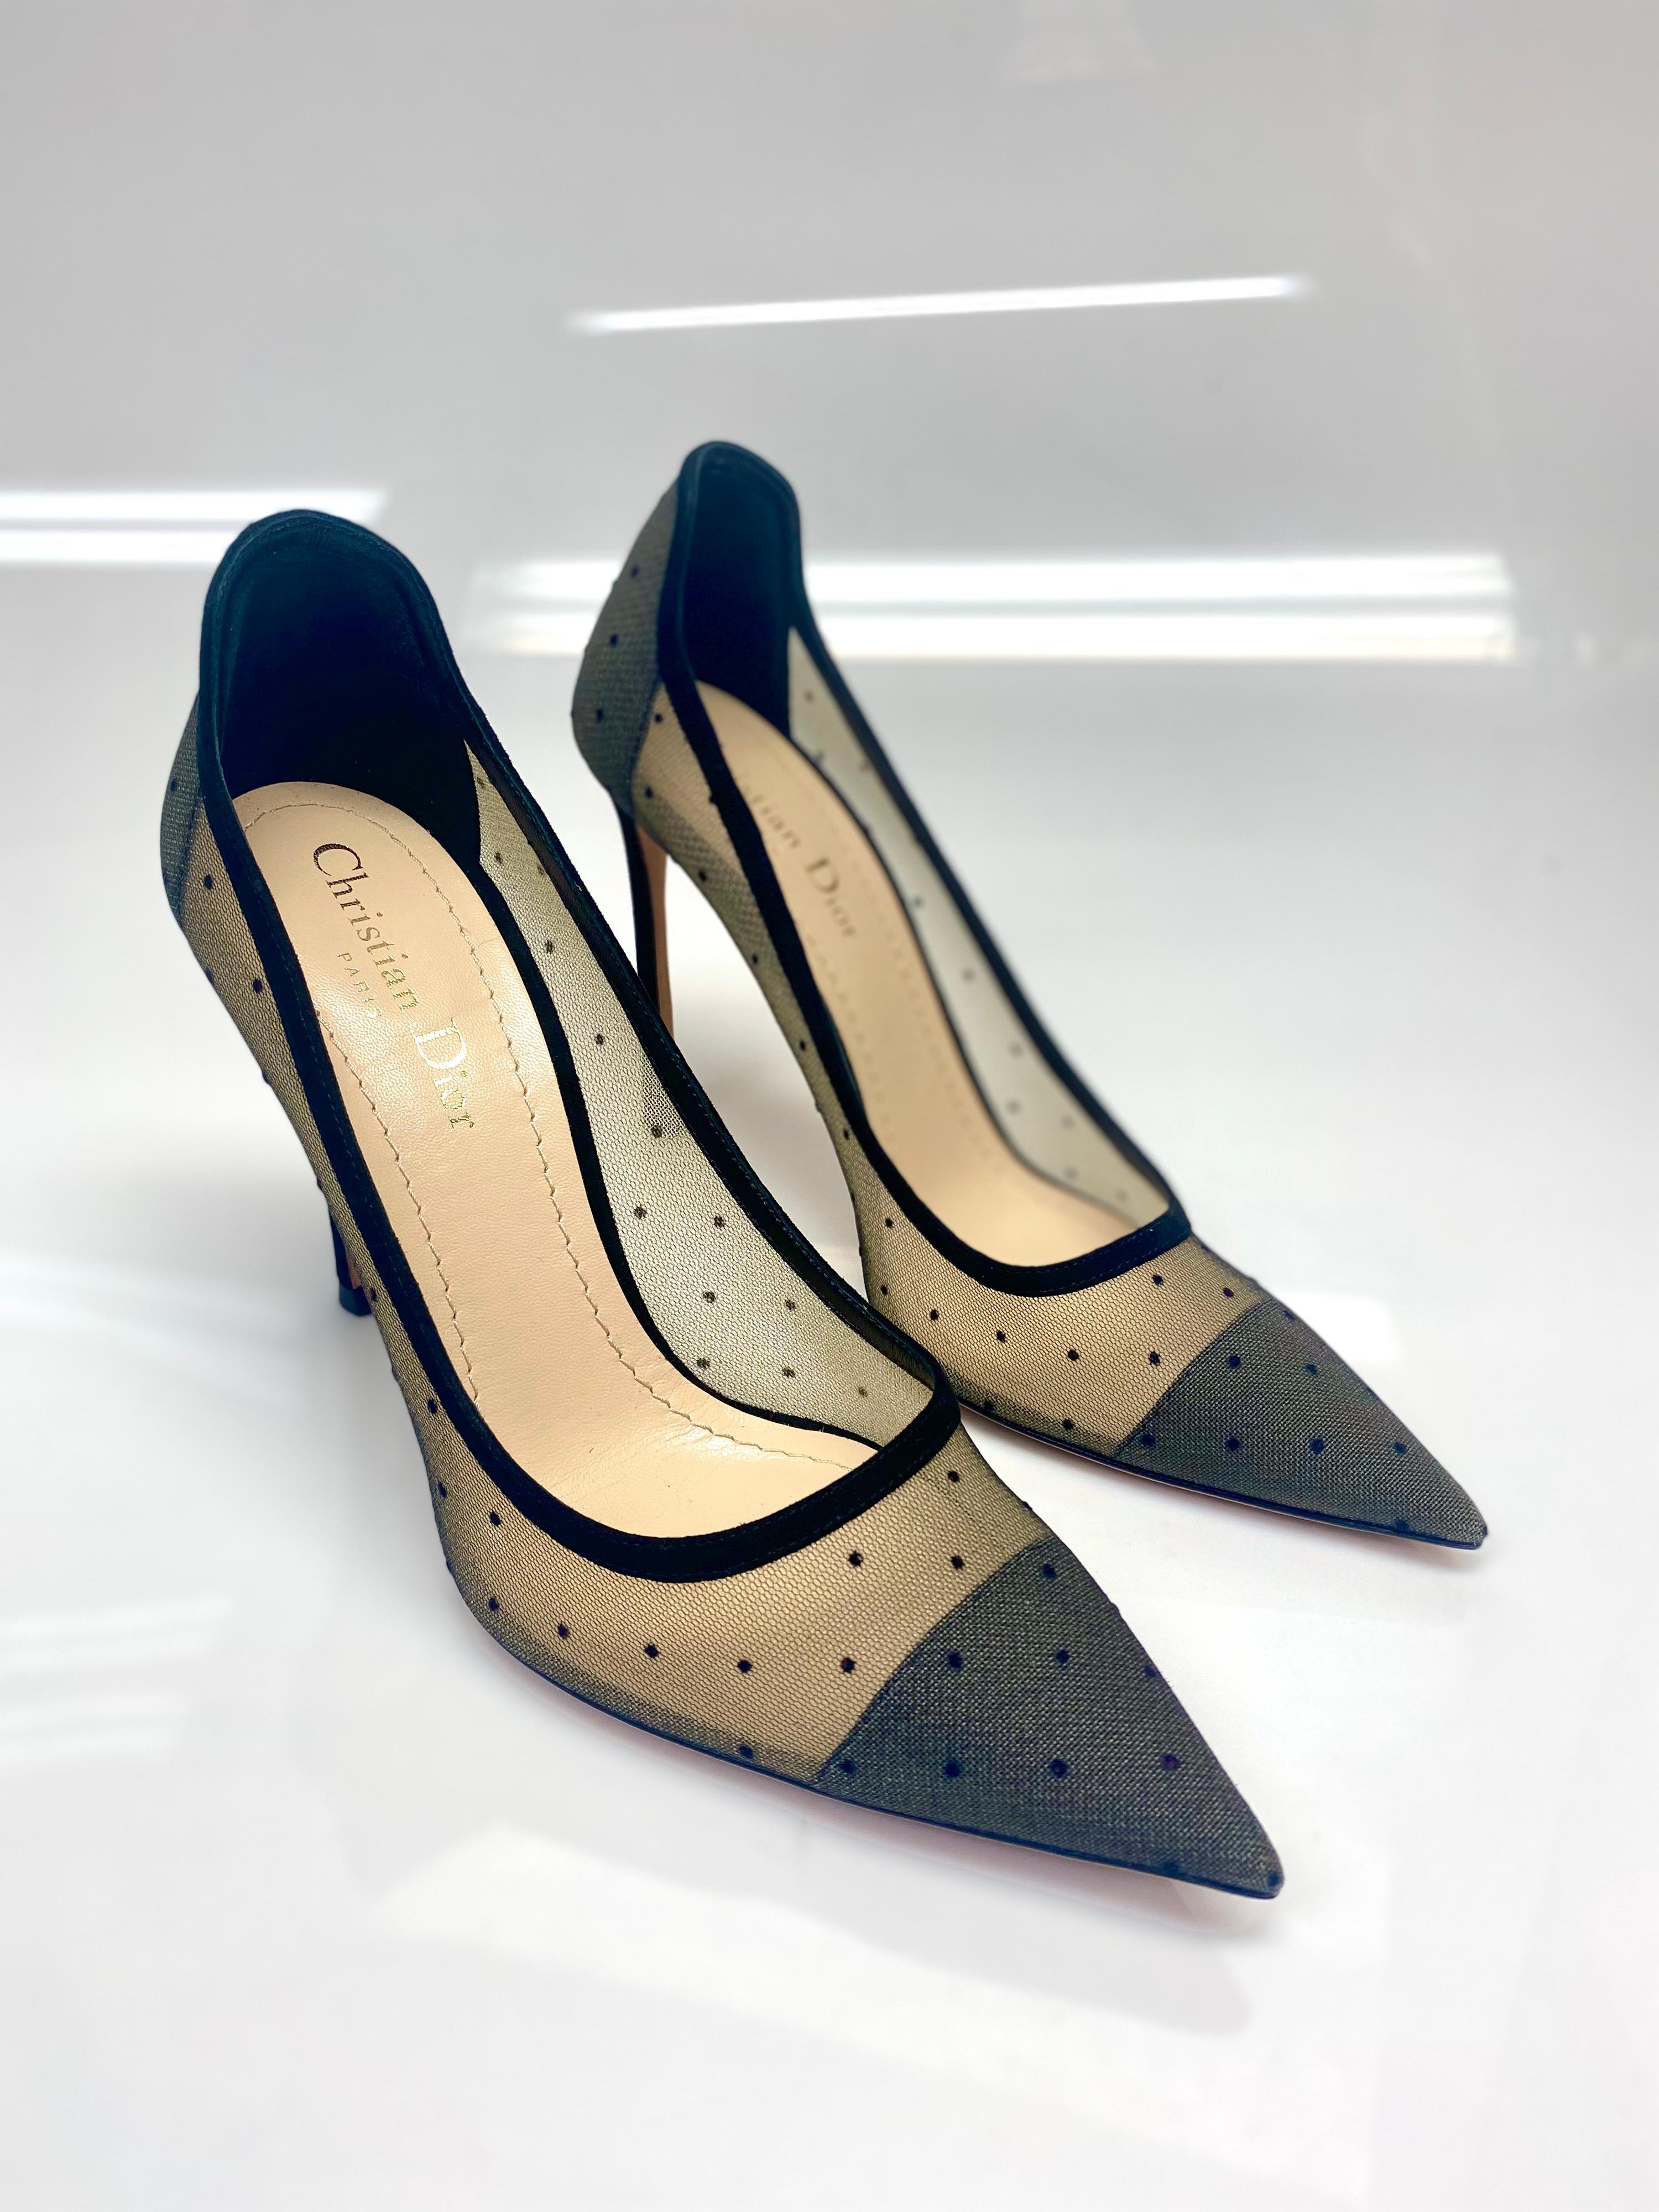 Christian Dior Black Mesh Polka Dot Suede Heels Size 39. These stunning pumps from Christian Dior are truly a standout. Featuring mesh detailing with black polka dots and black suede lining. The heel has a pointed toe for a sophisticated look. Size